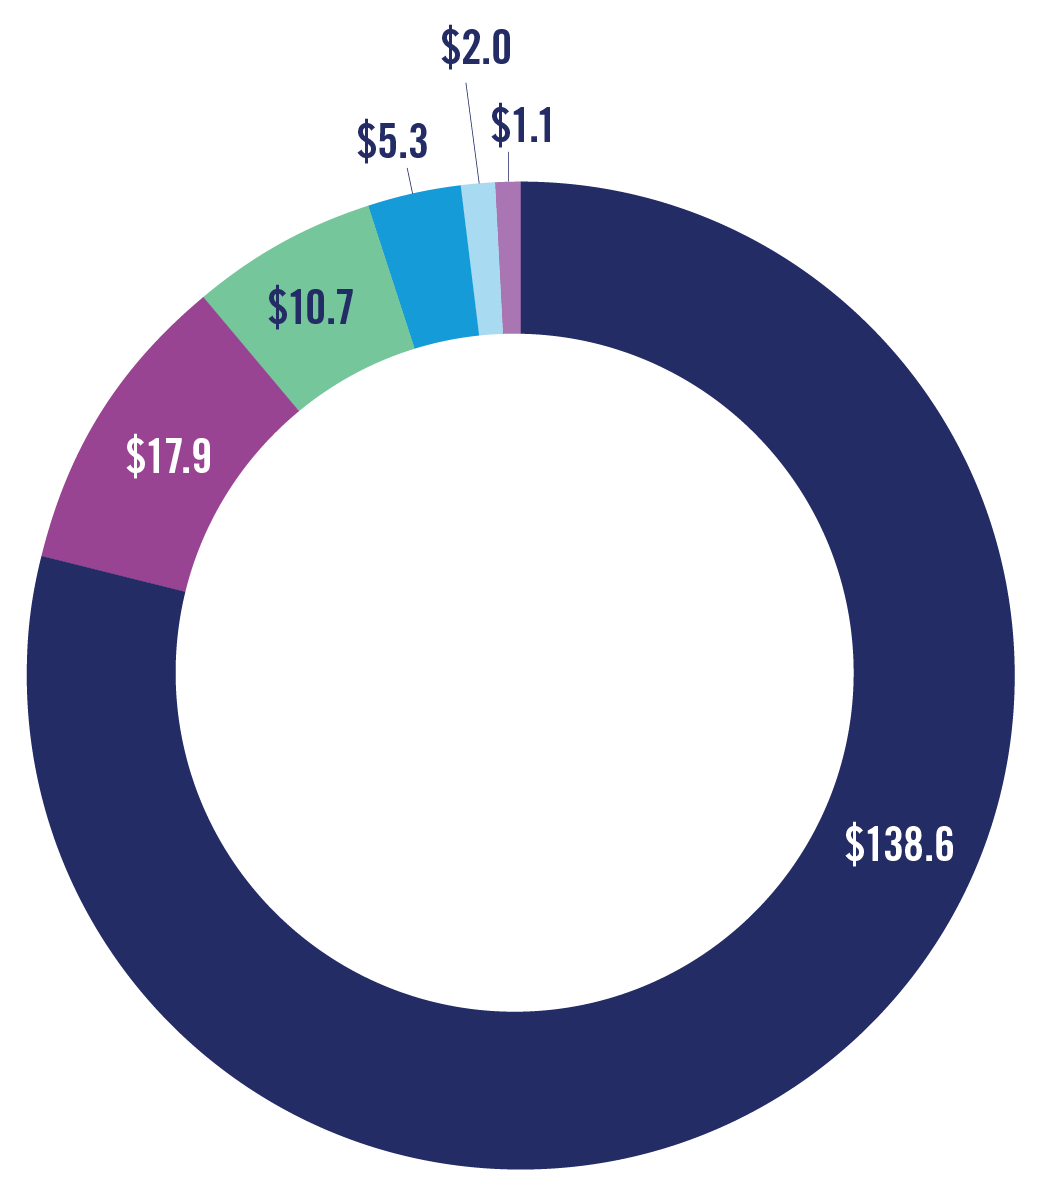 Pie chart showing contributions to community. Pieces are labeled as: $138.6, 17.9, 10.7, 5.3, 2.0, 1.1